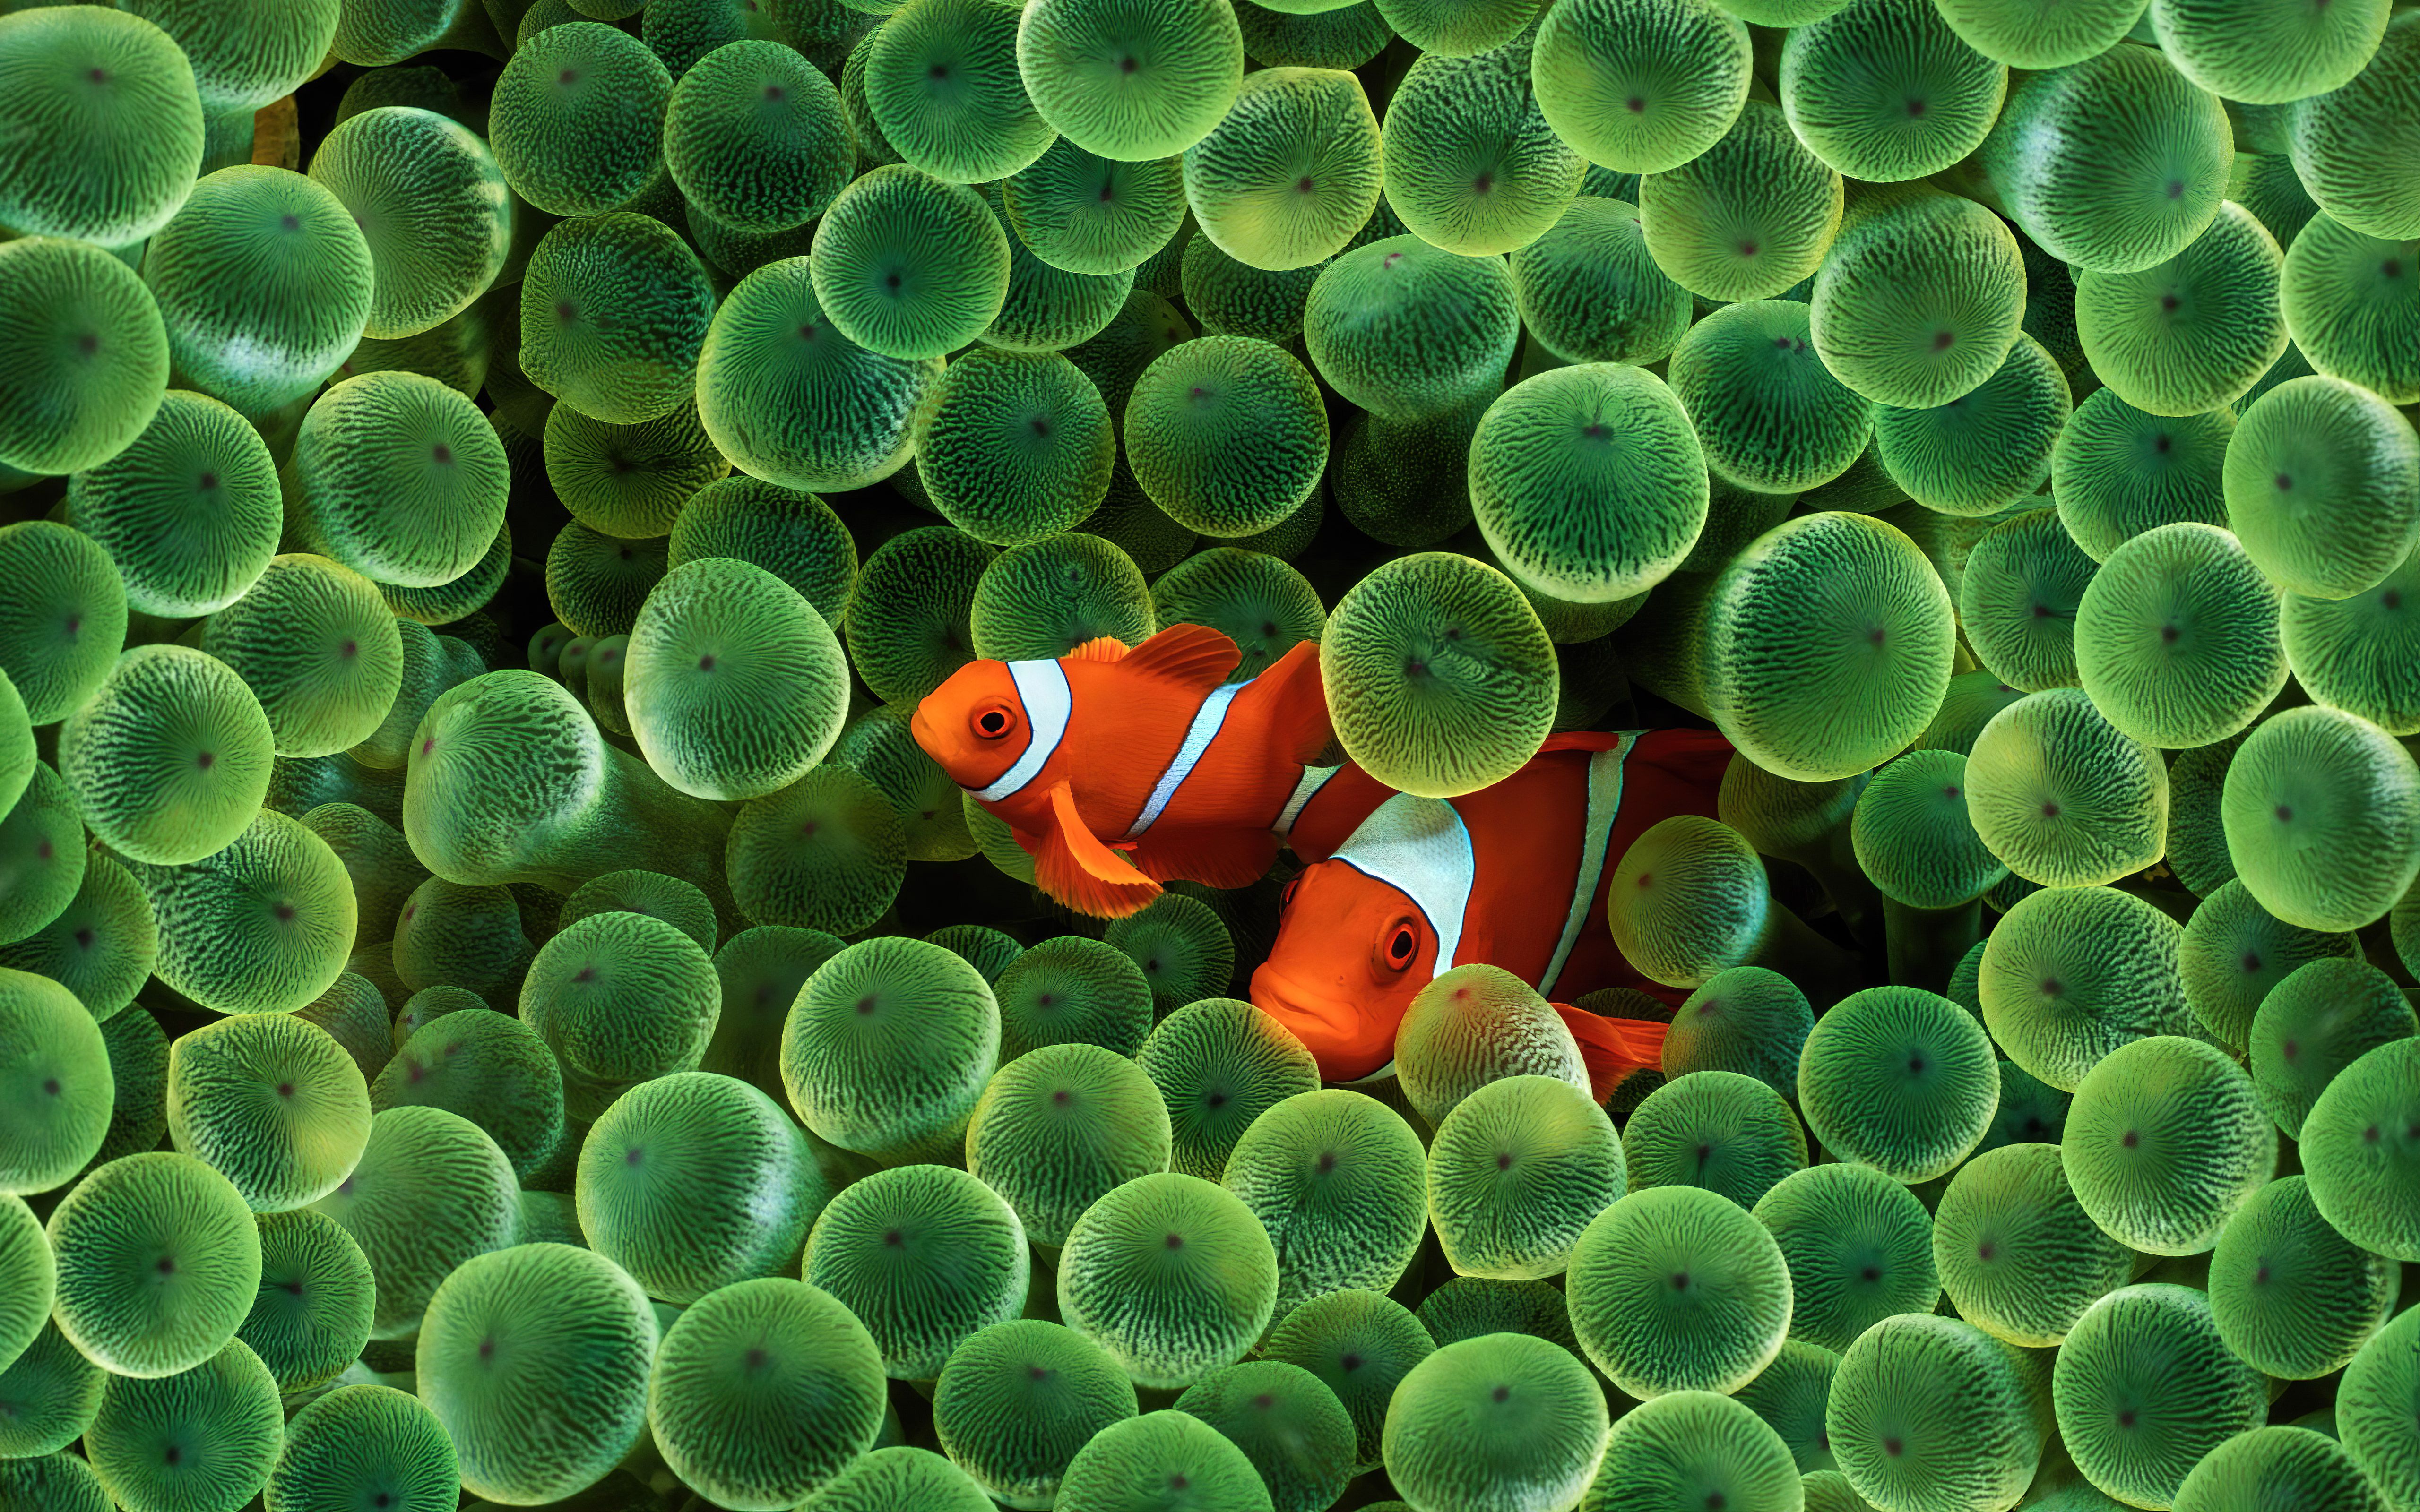 The old Apple Clown Fish wallpaper upscaled to [5120x3200]